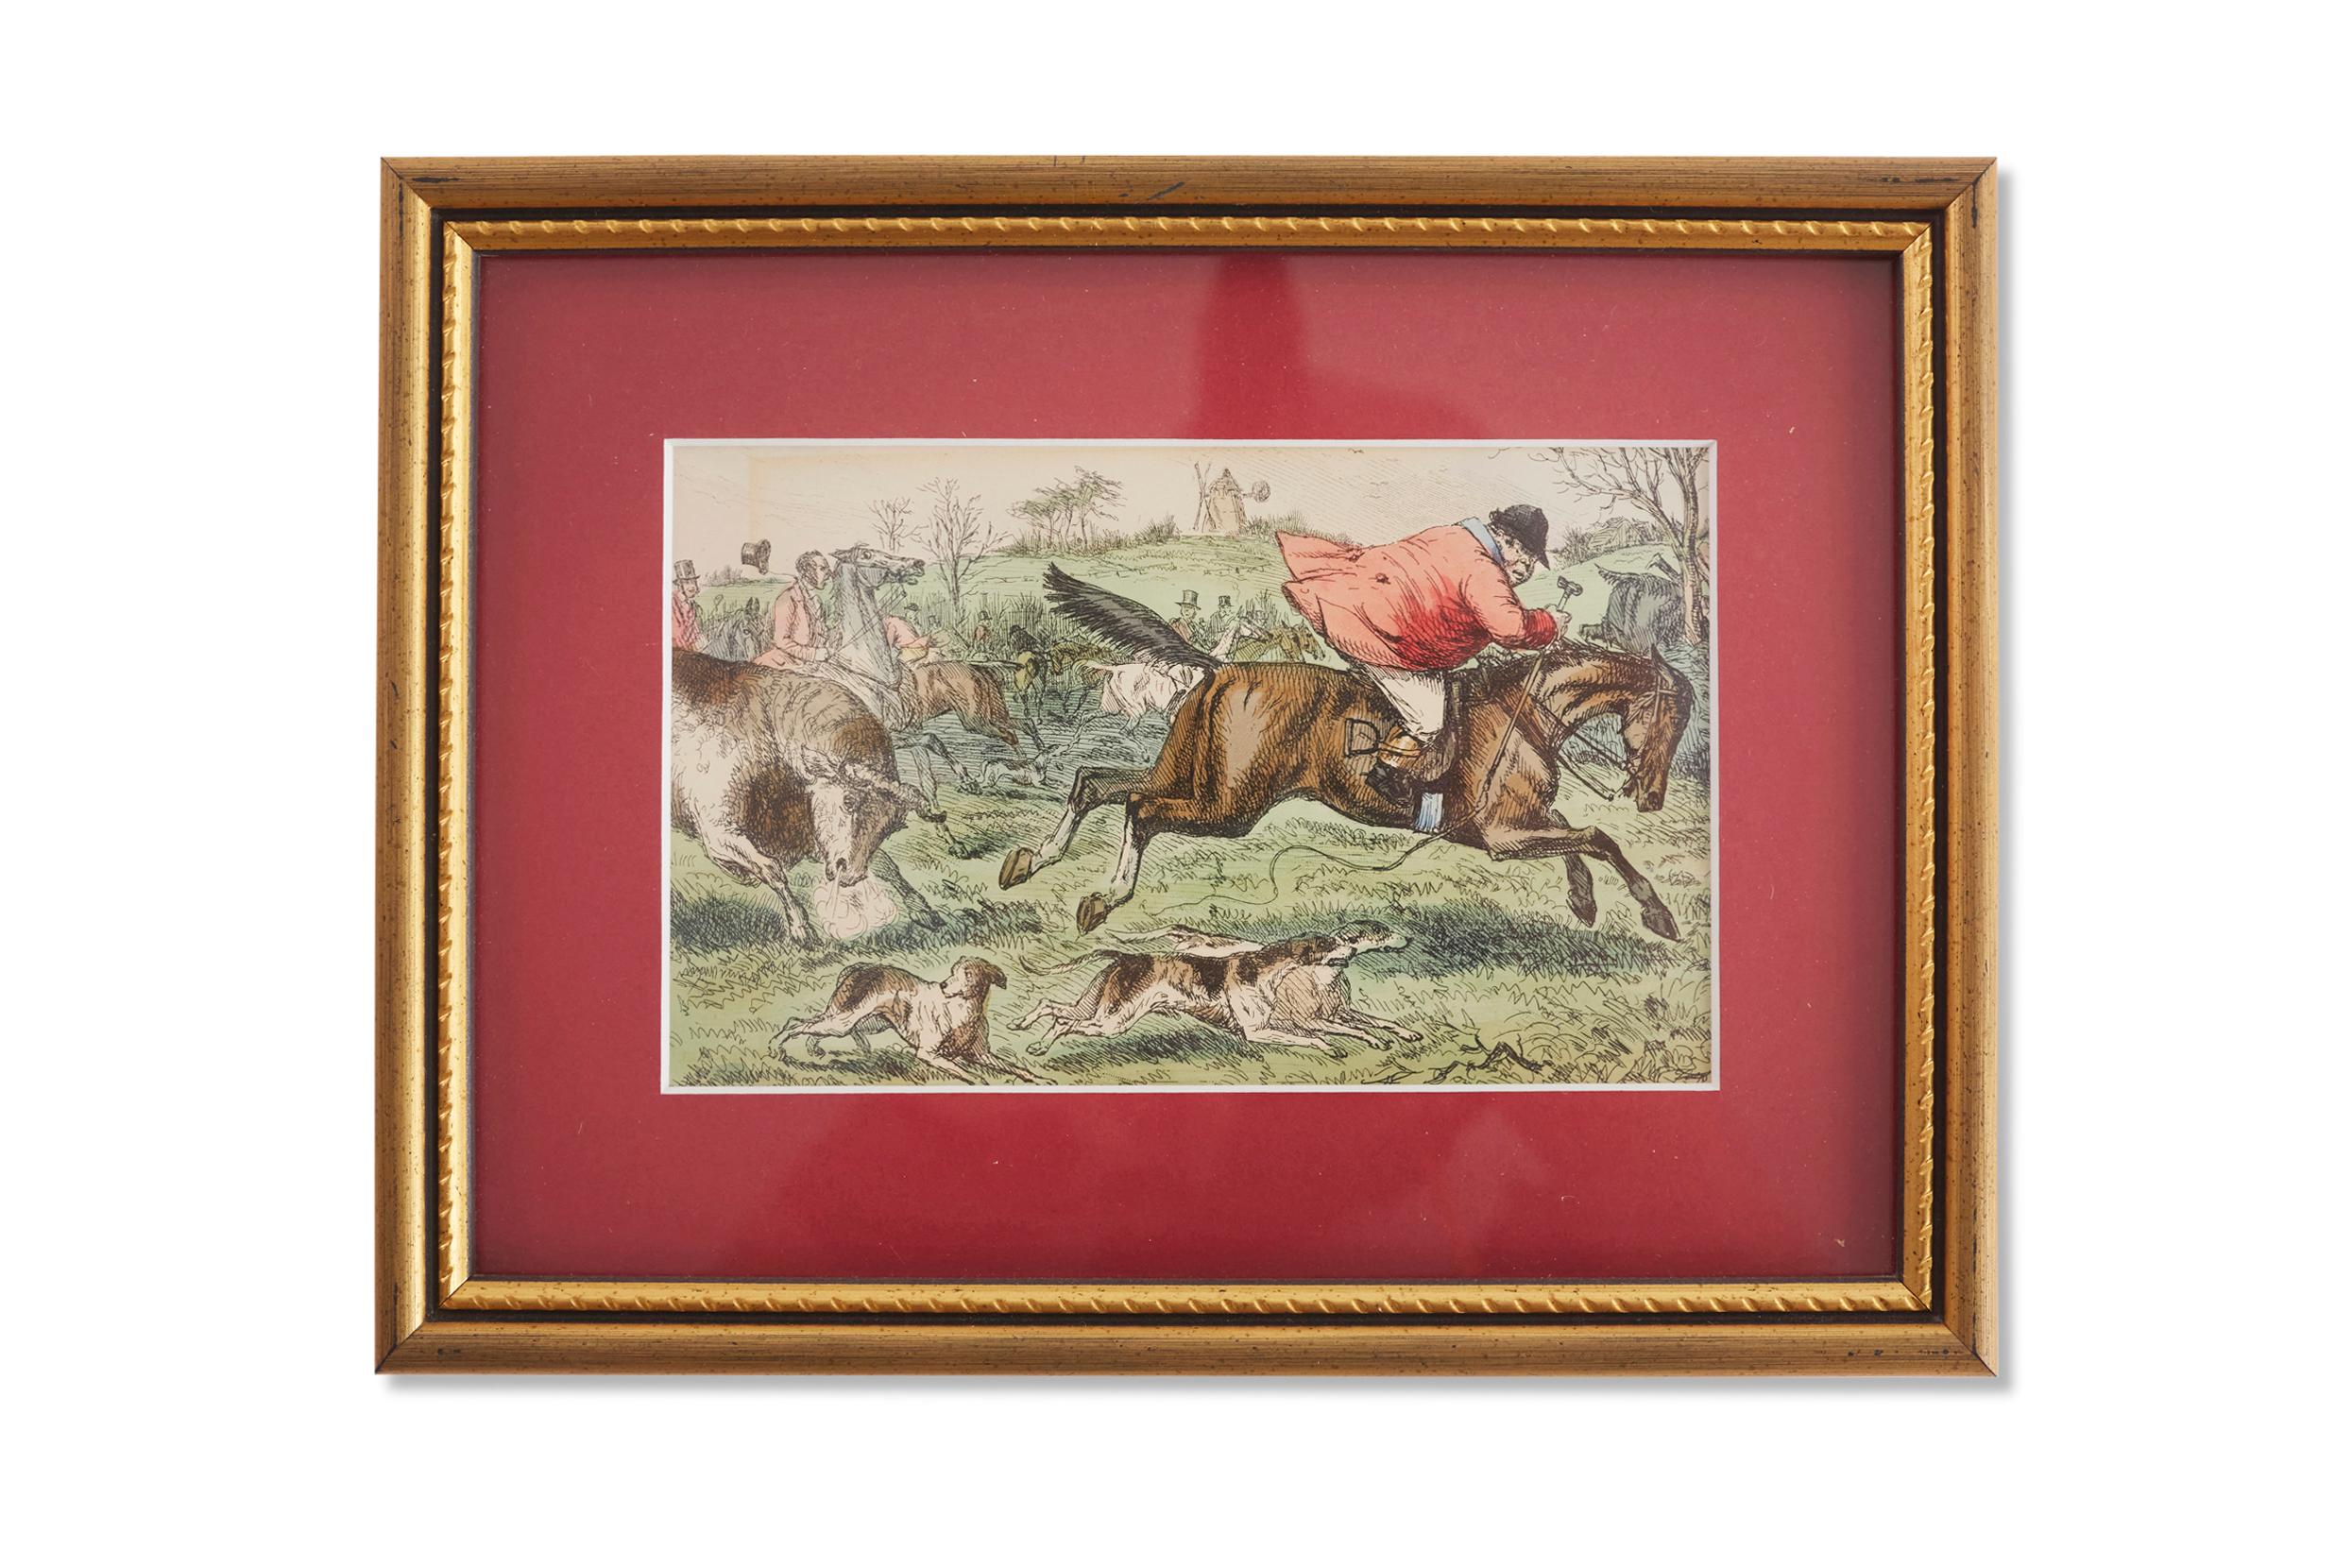 A group of gilt wood framed collection of nine colored etchings by John Leech ( 1817 - 1864 ). The present works are from a first edition of handley cross. Each etching is in good condition. Minor wear consistent with age / use. Frame is about 9.5